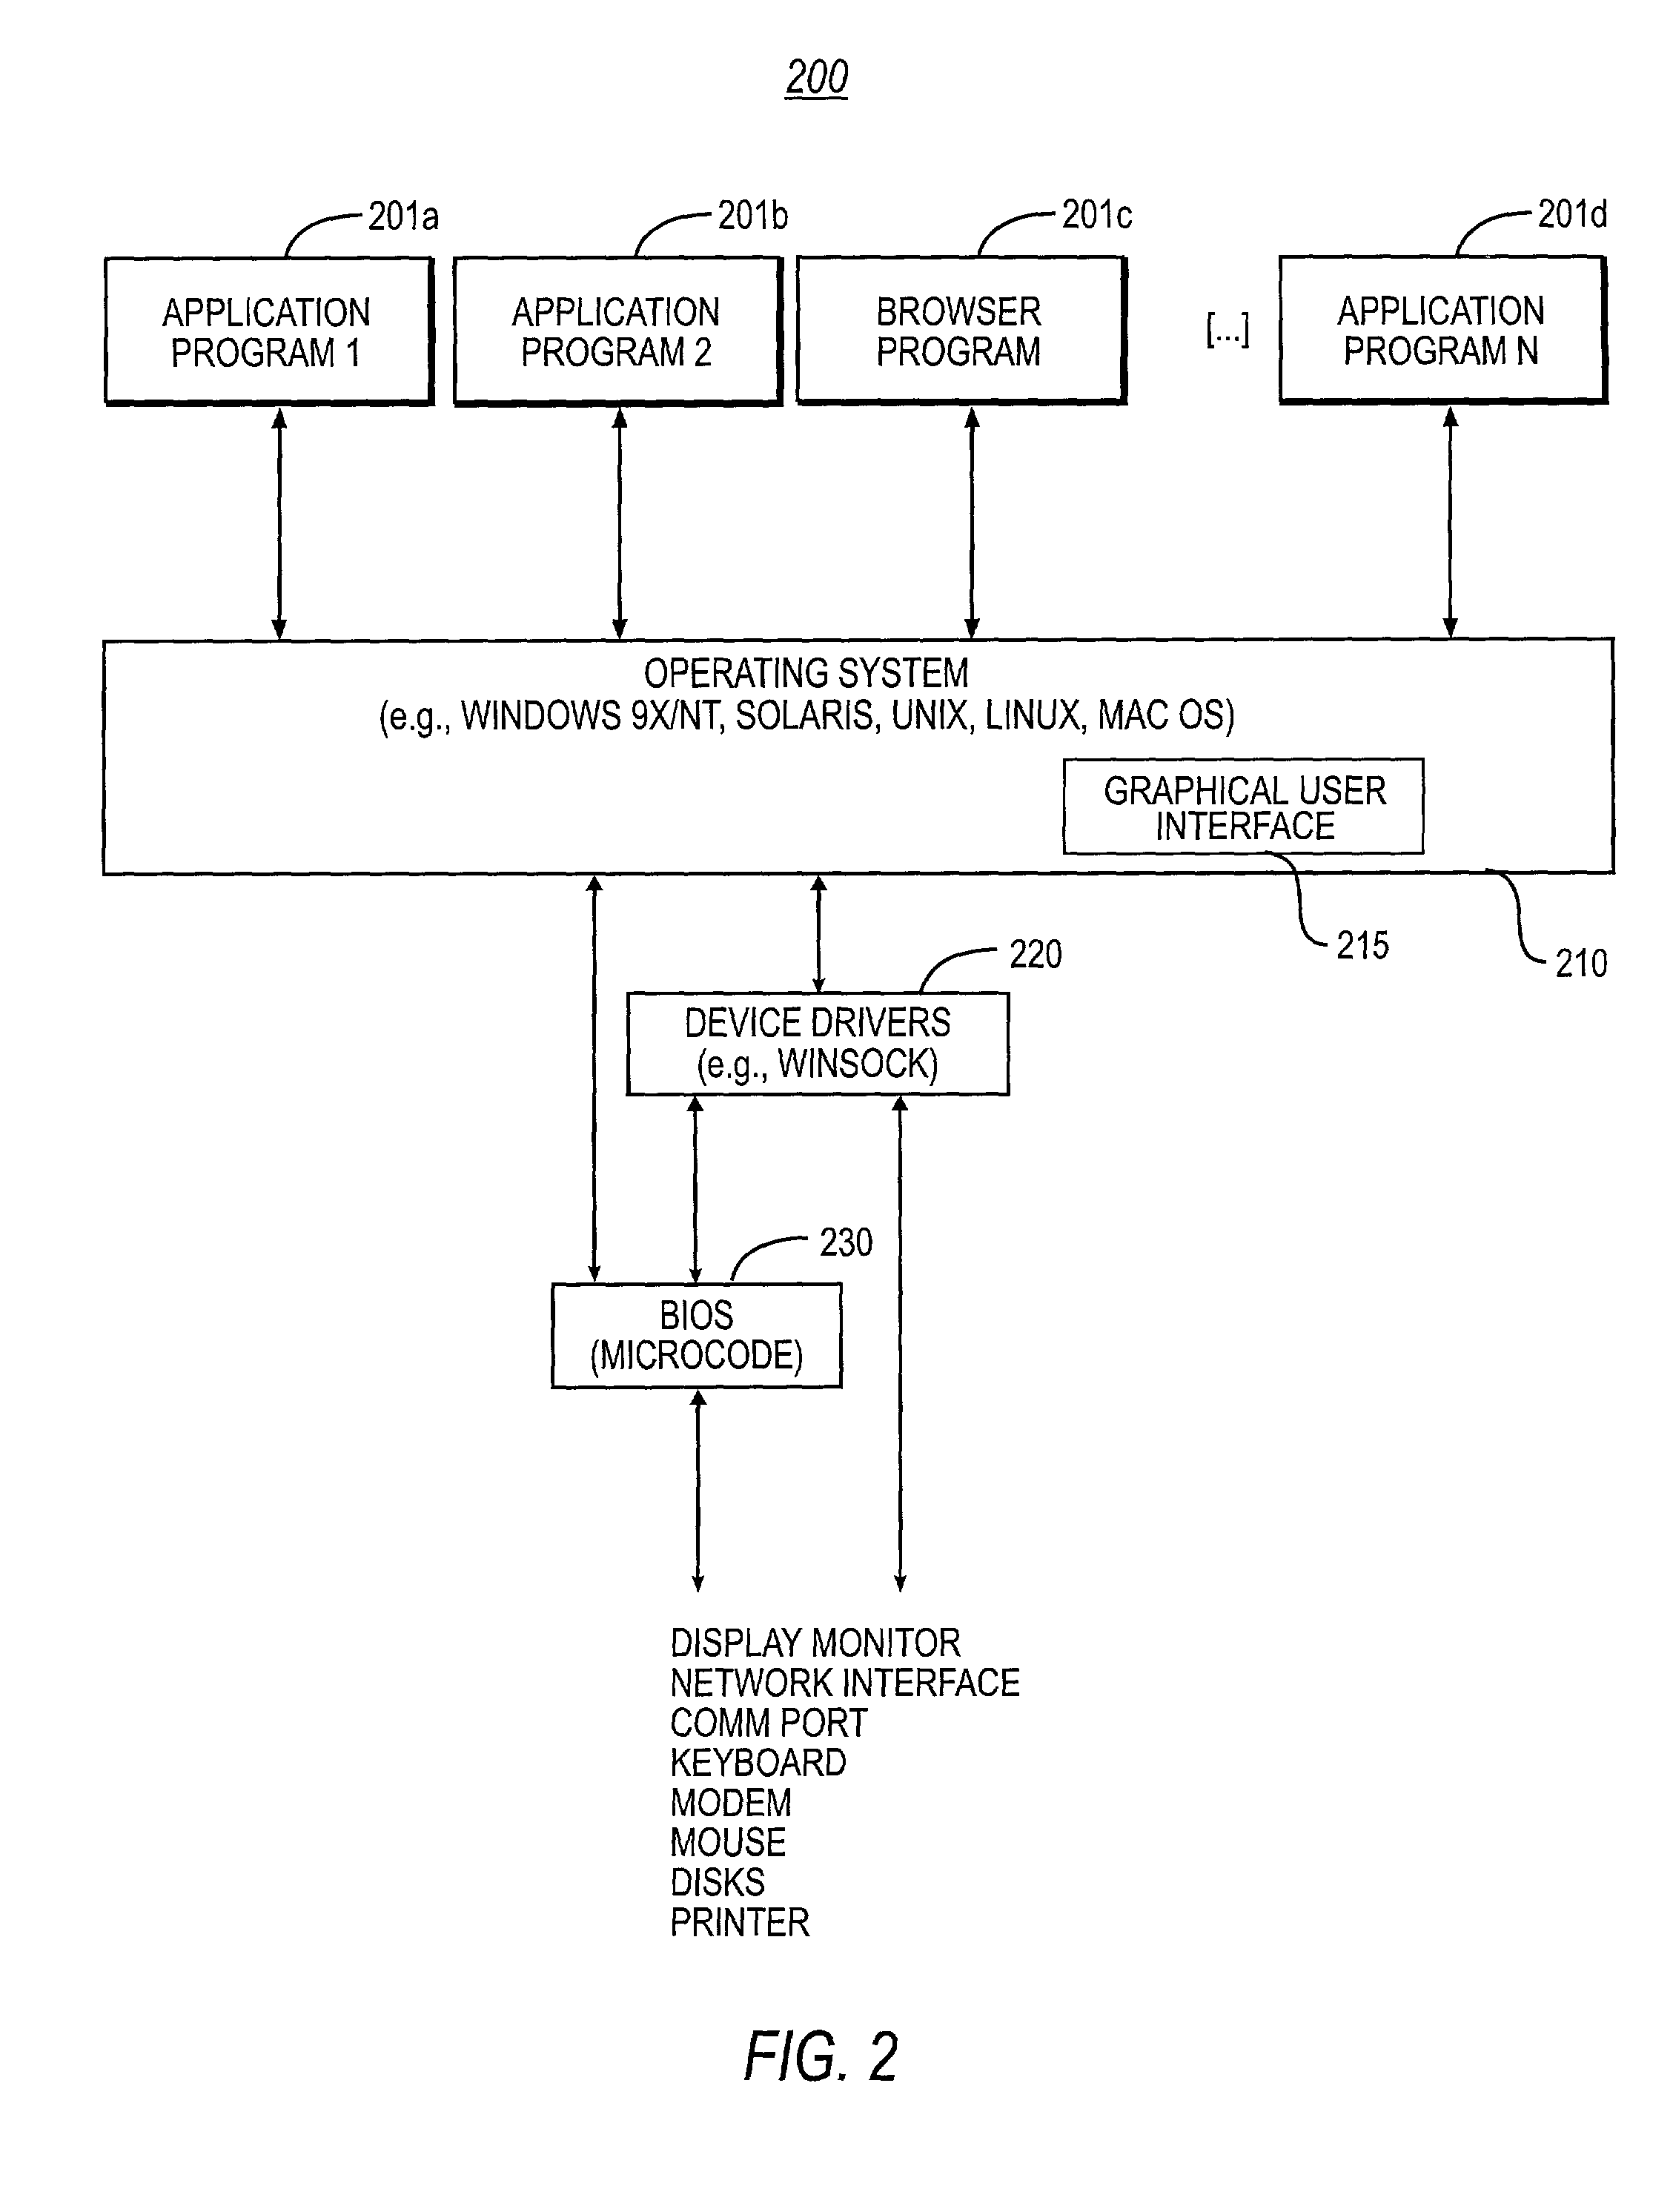 System and methodology for optimizing delivery of email attachments for disparate devices